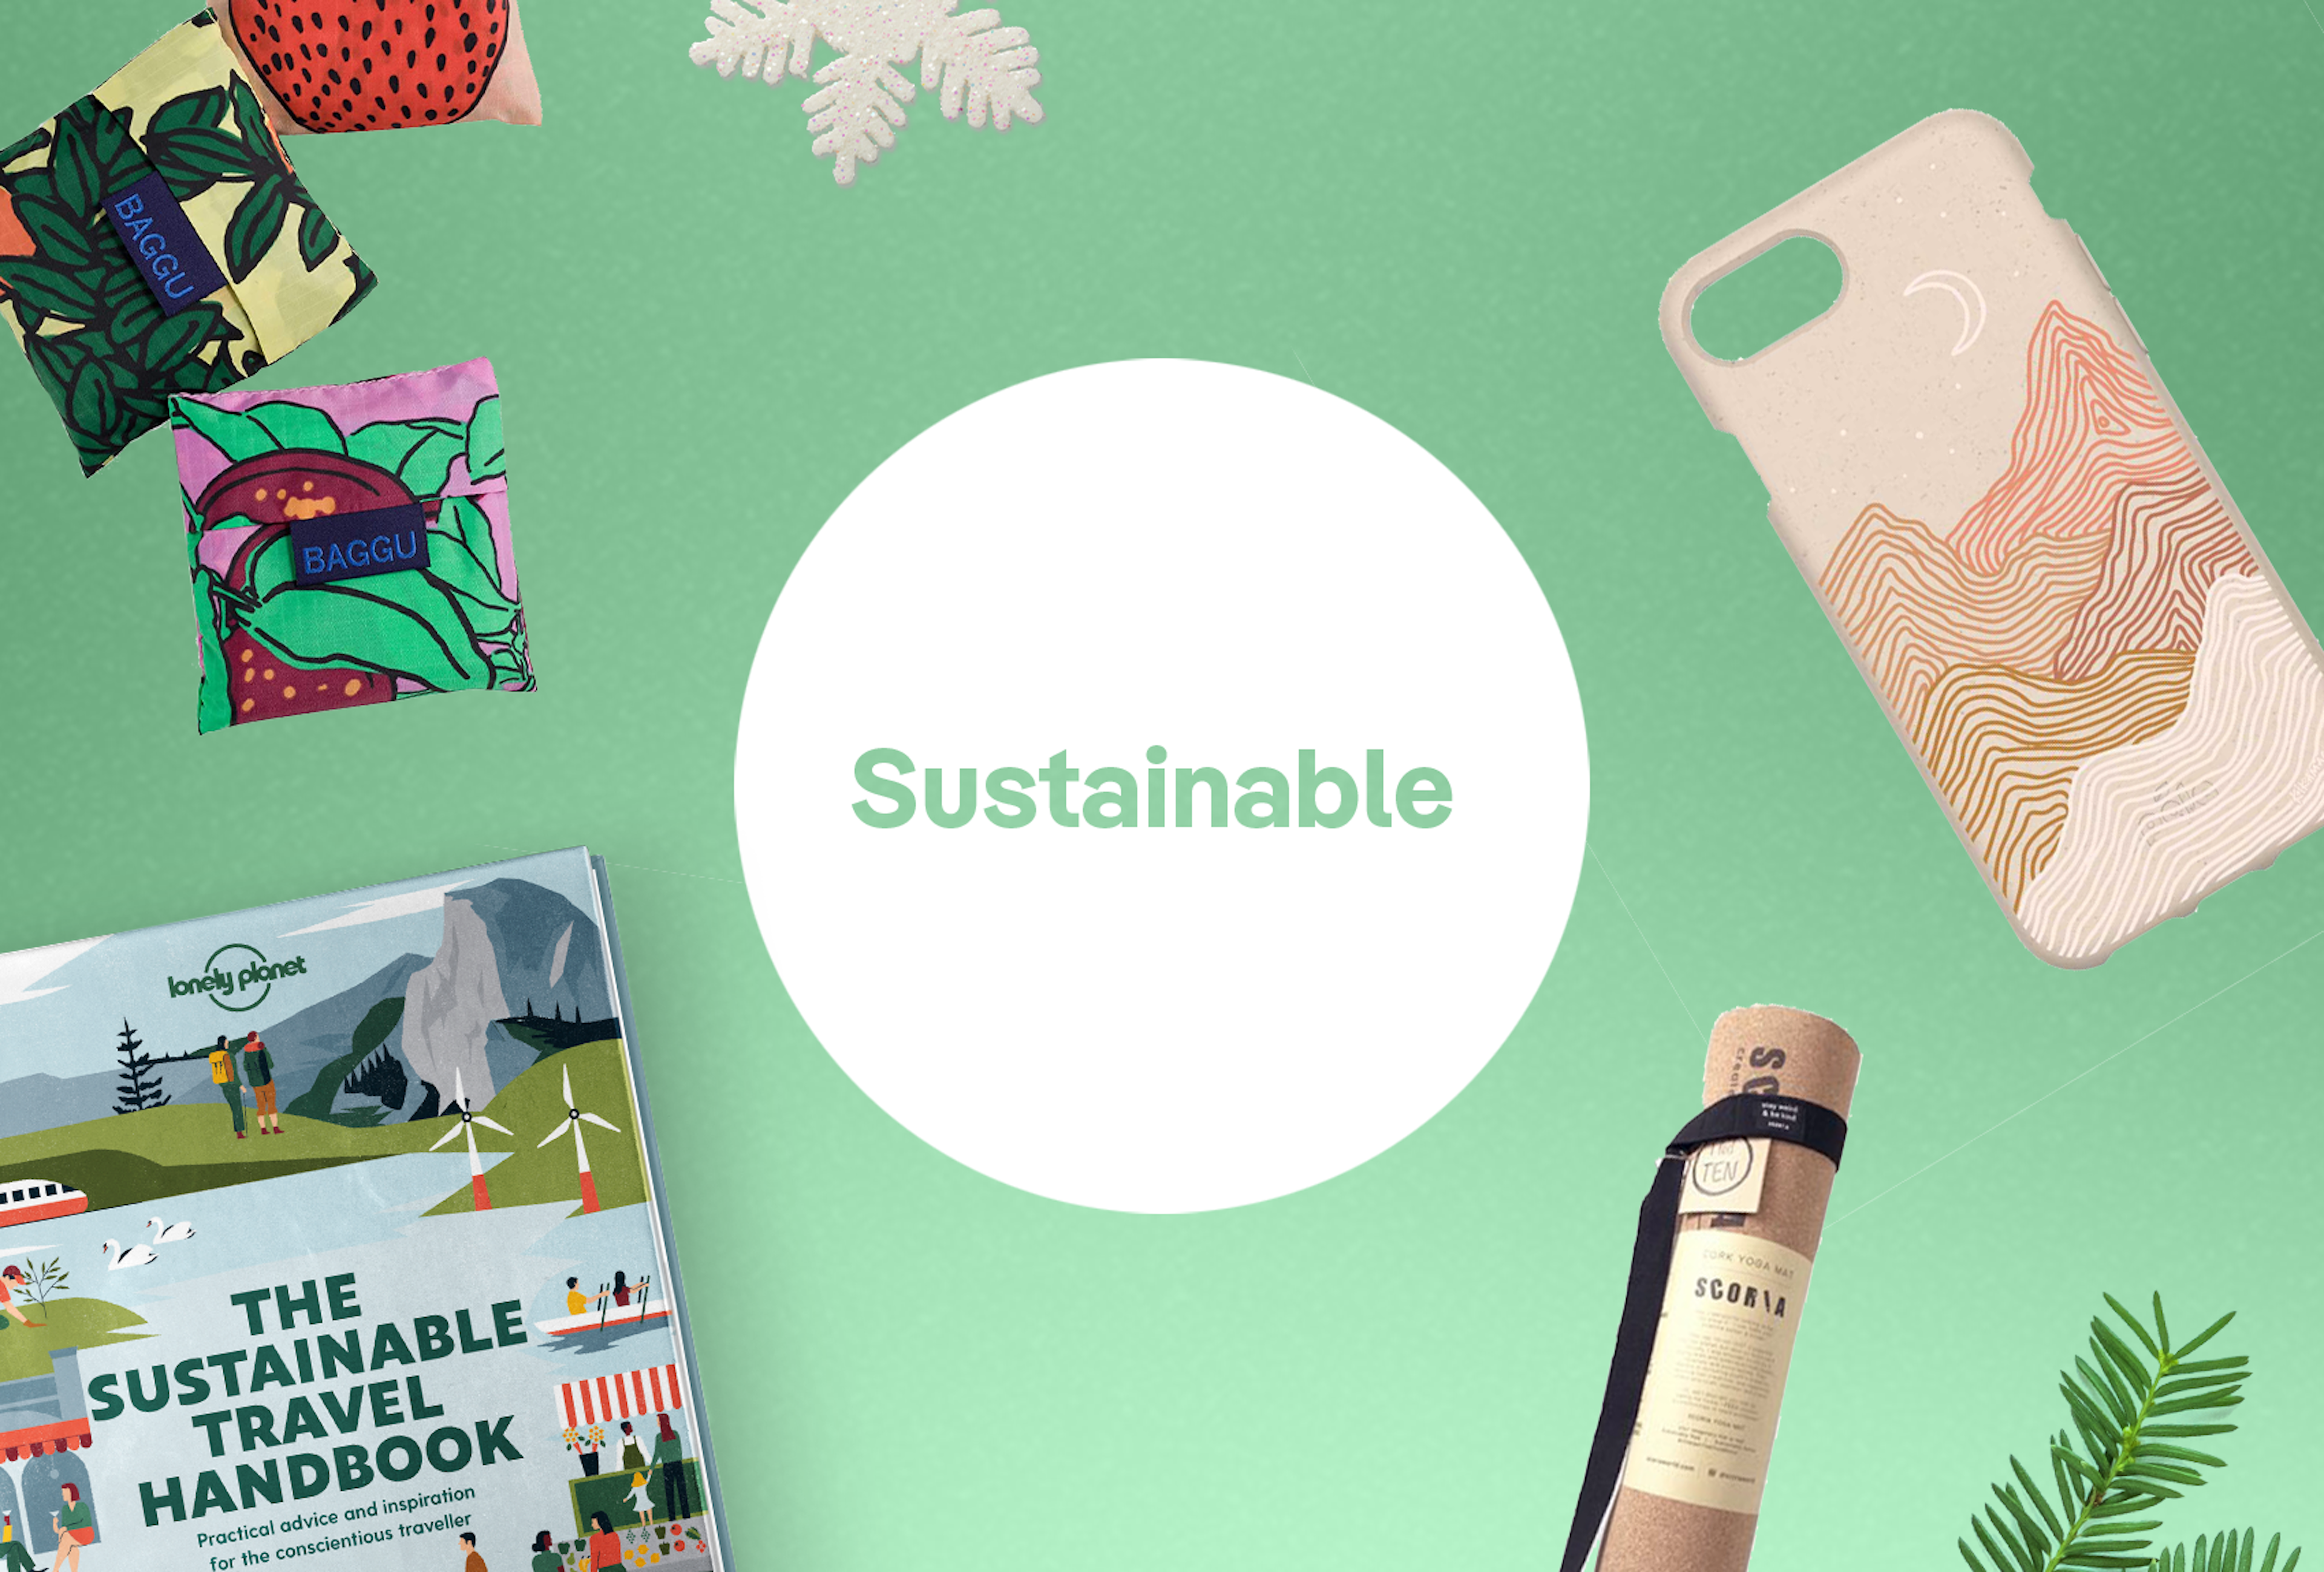 A green image with a white circle in the center. Inside the circle is the word Sustainable, also in green. Around the circle is an image of reusable shopping bags, a cell phone case, a rolled up yoga mat and the Sustainable Travel Handbook from Lonely Planet